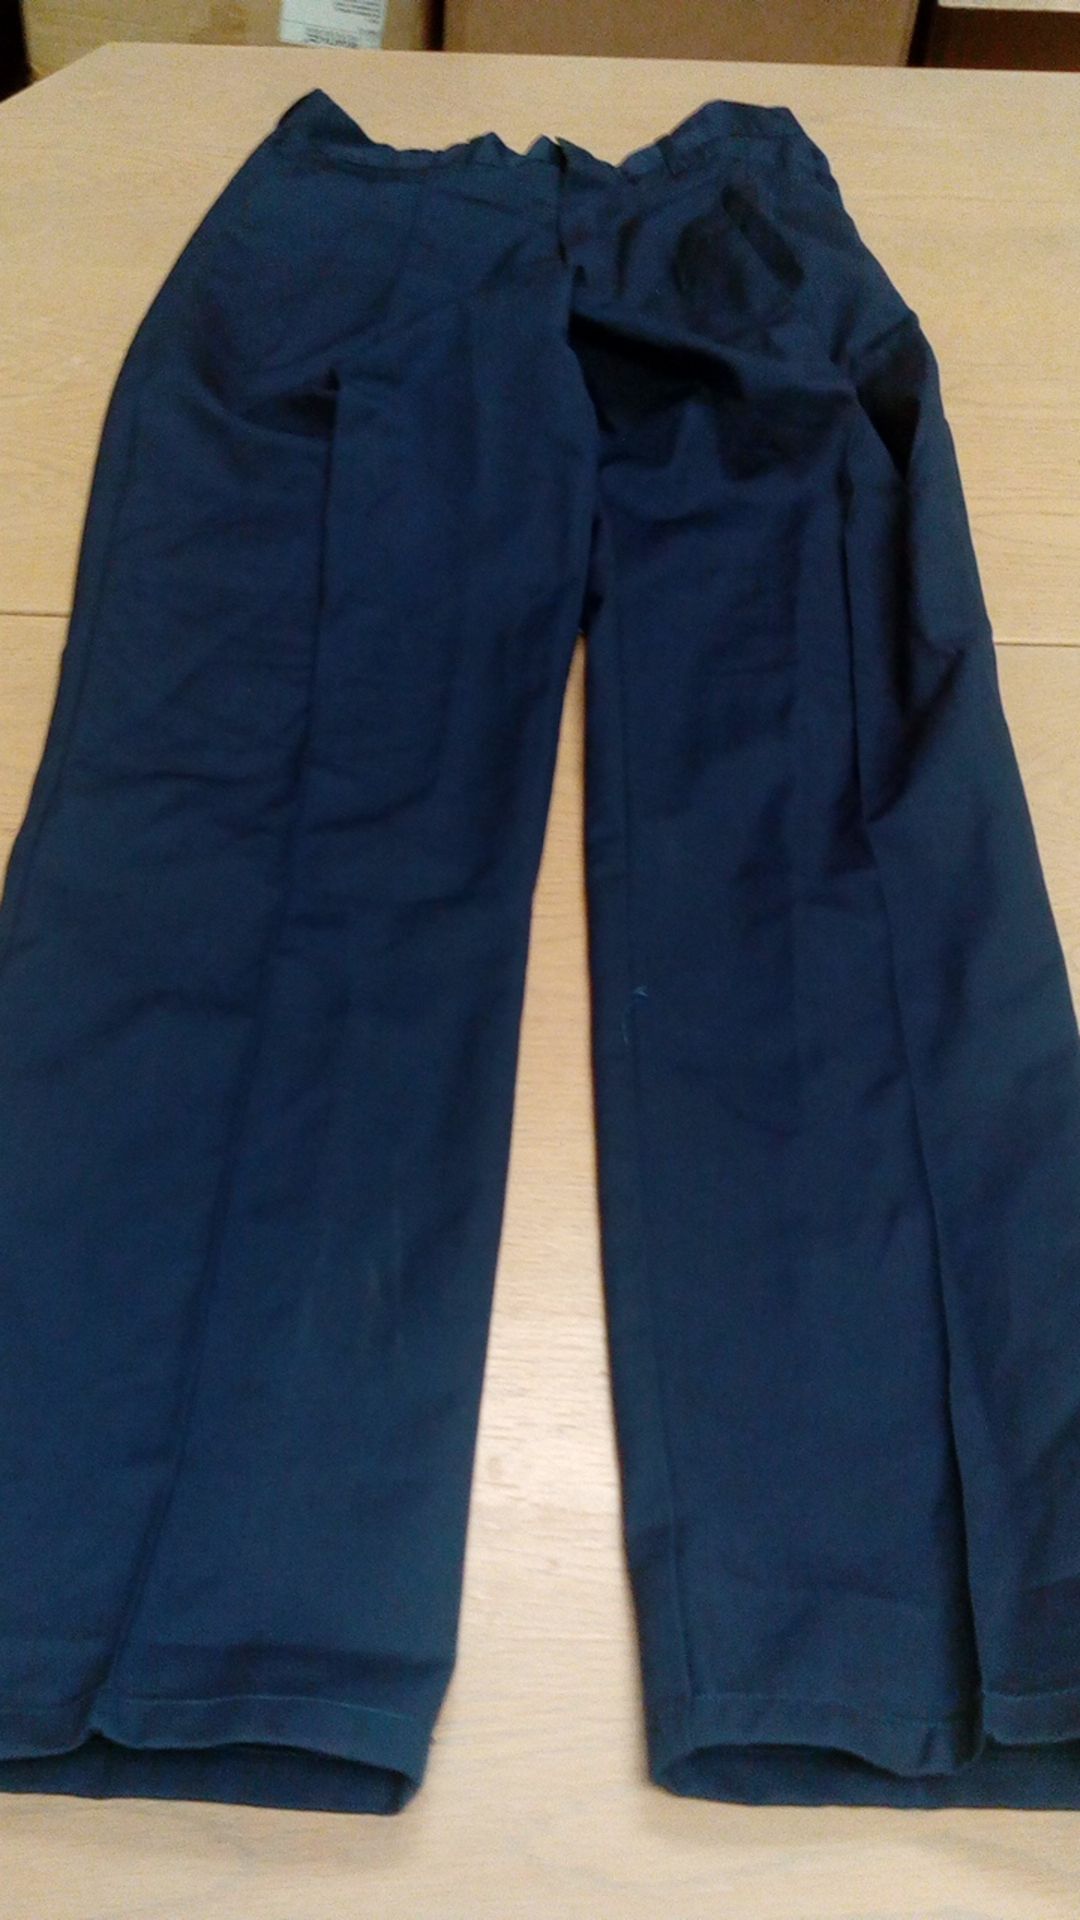 Alexandra workwear size 34 1/2 inch mens work trousers Alexandra workwear new and unused, these